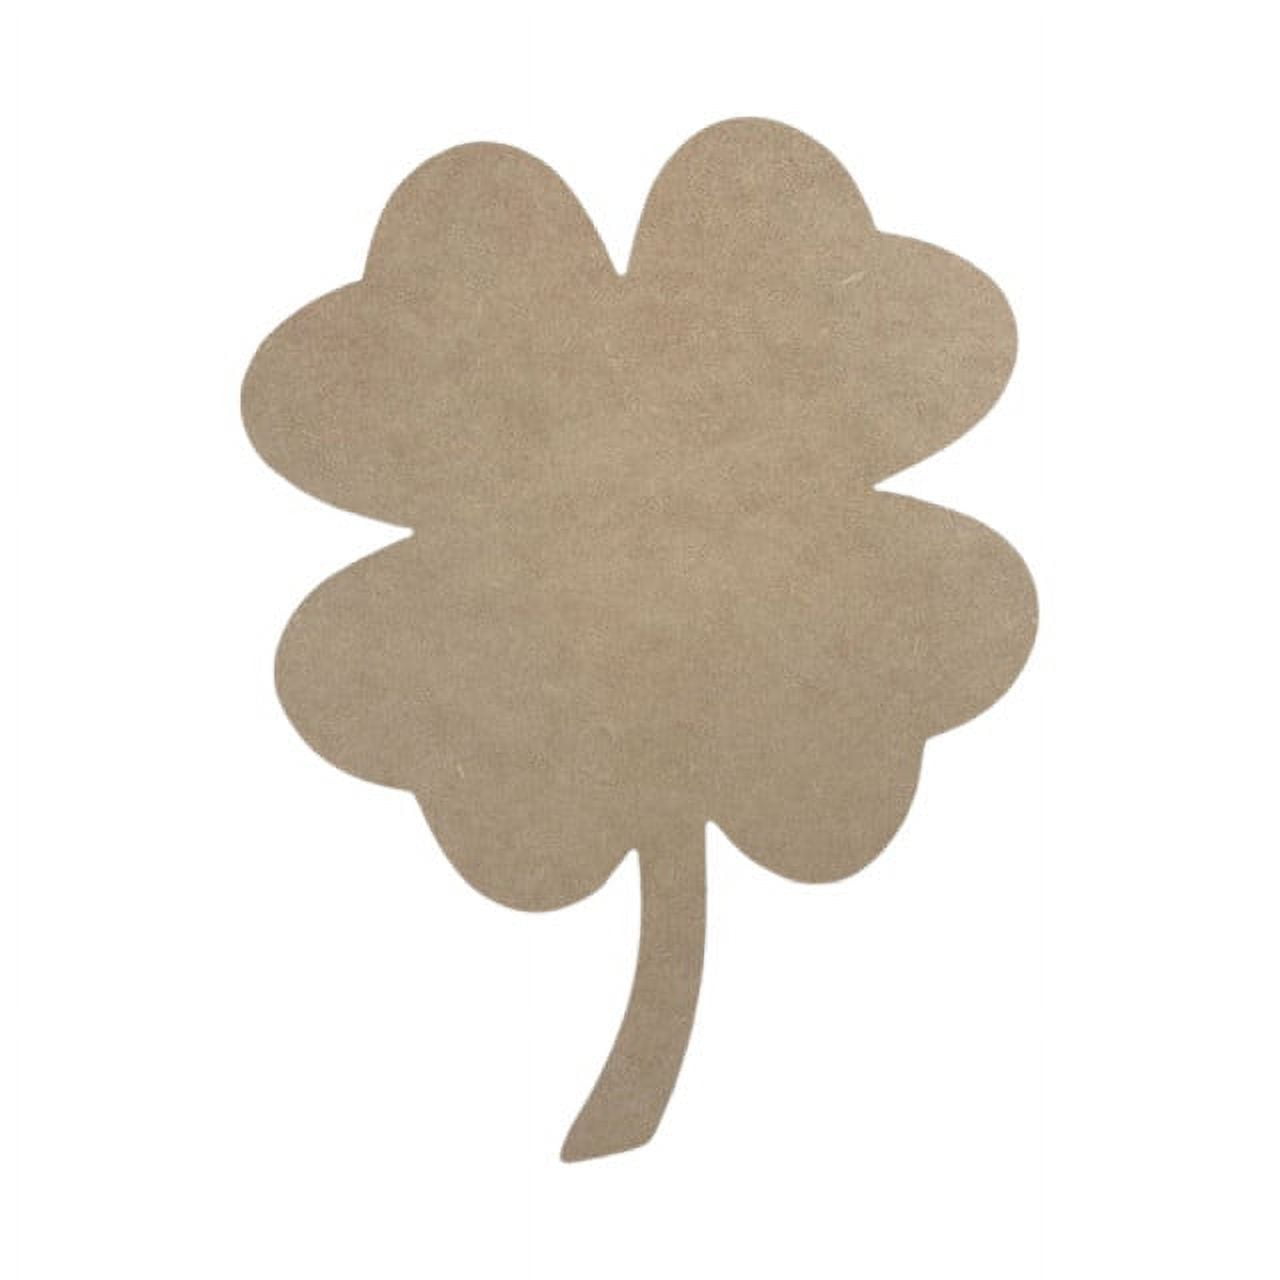 3 leaf clover Unfinished Cutout, Wooden Shape, Paintable Wooden MDF